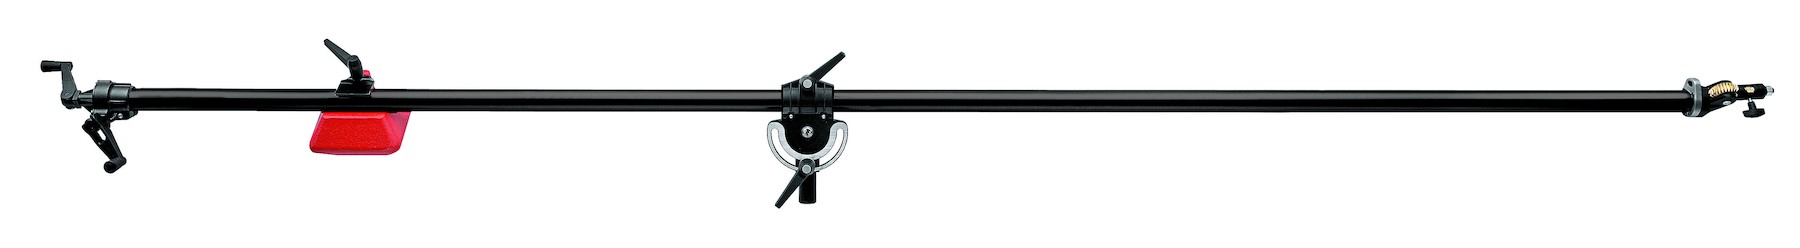 Напречно рамо Manfrotto Boom 025BSL